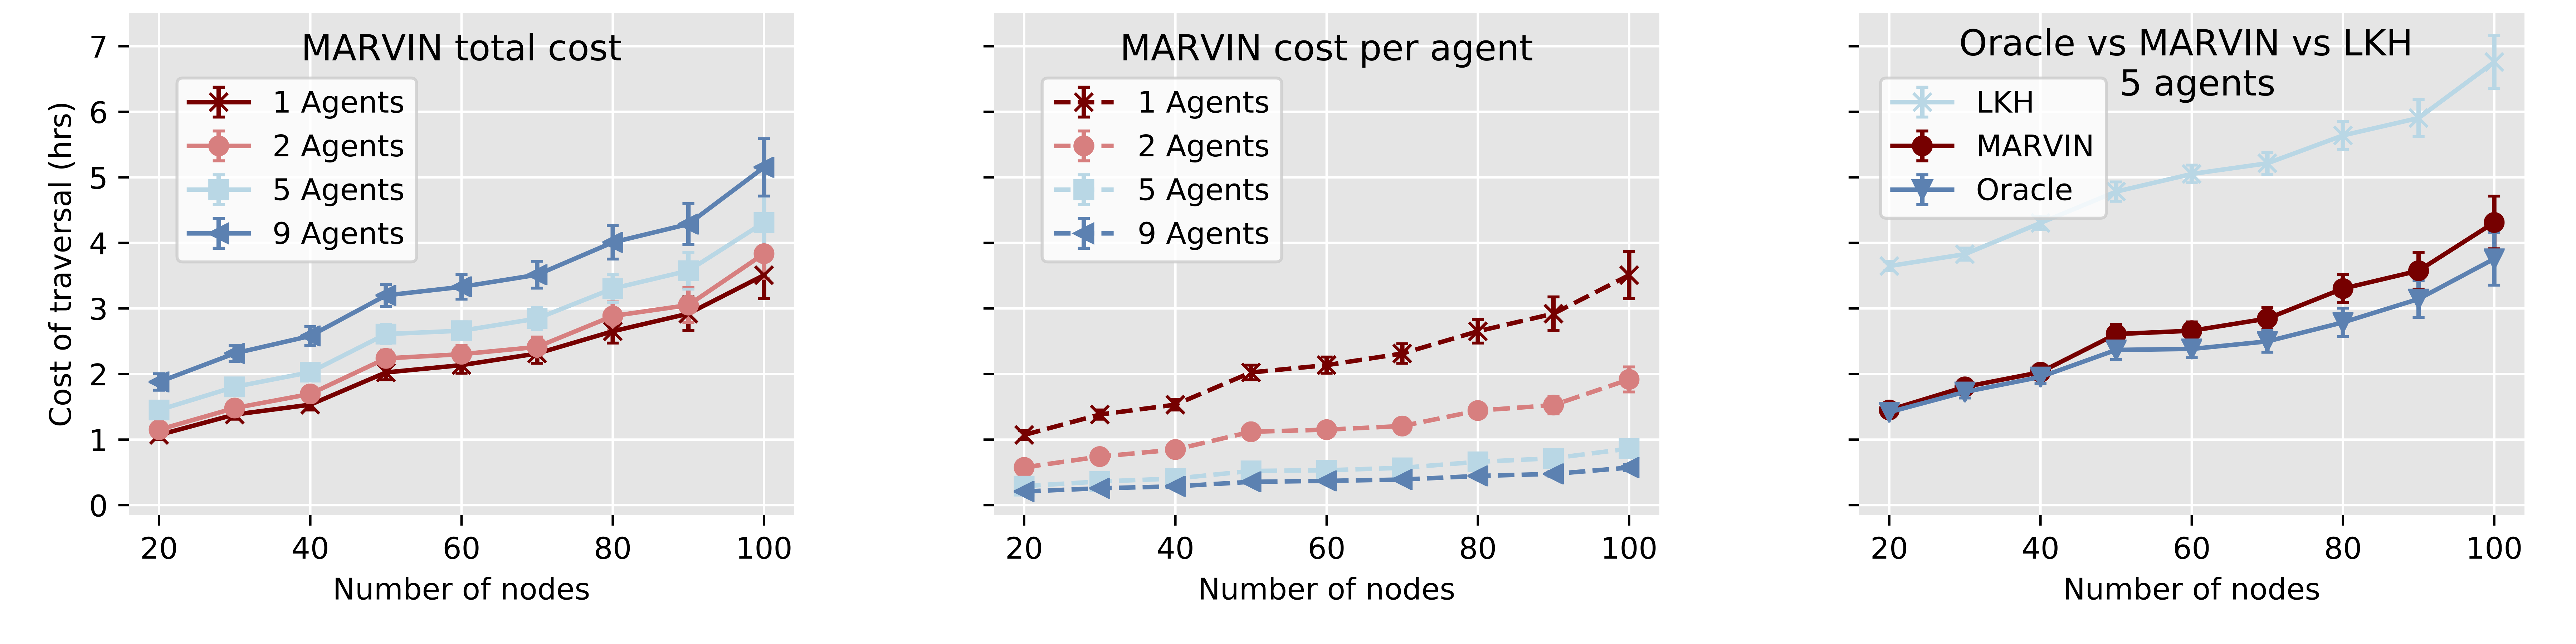 Number of agents performing traversal and corresponding cost of the traversal
(trained using RL)